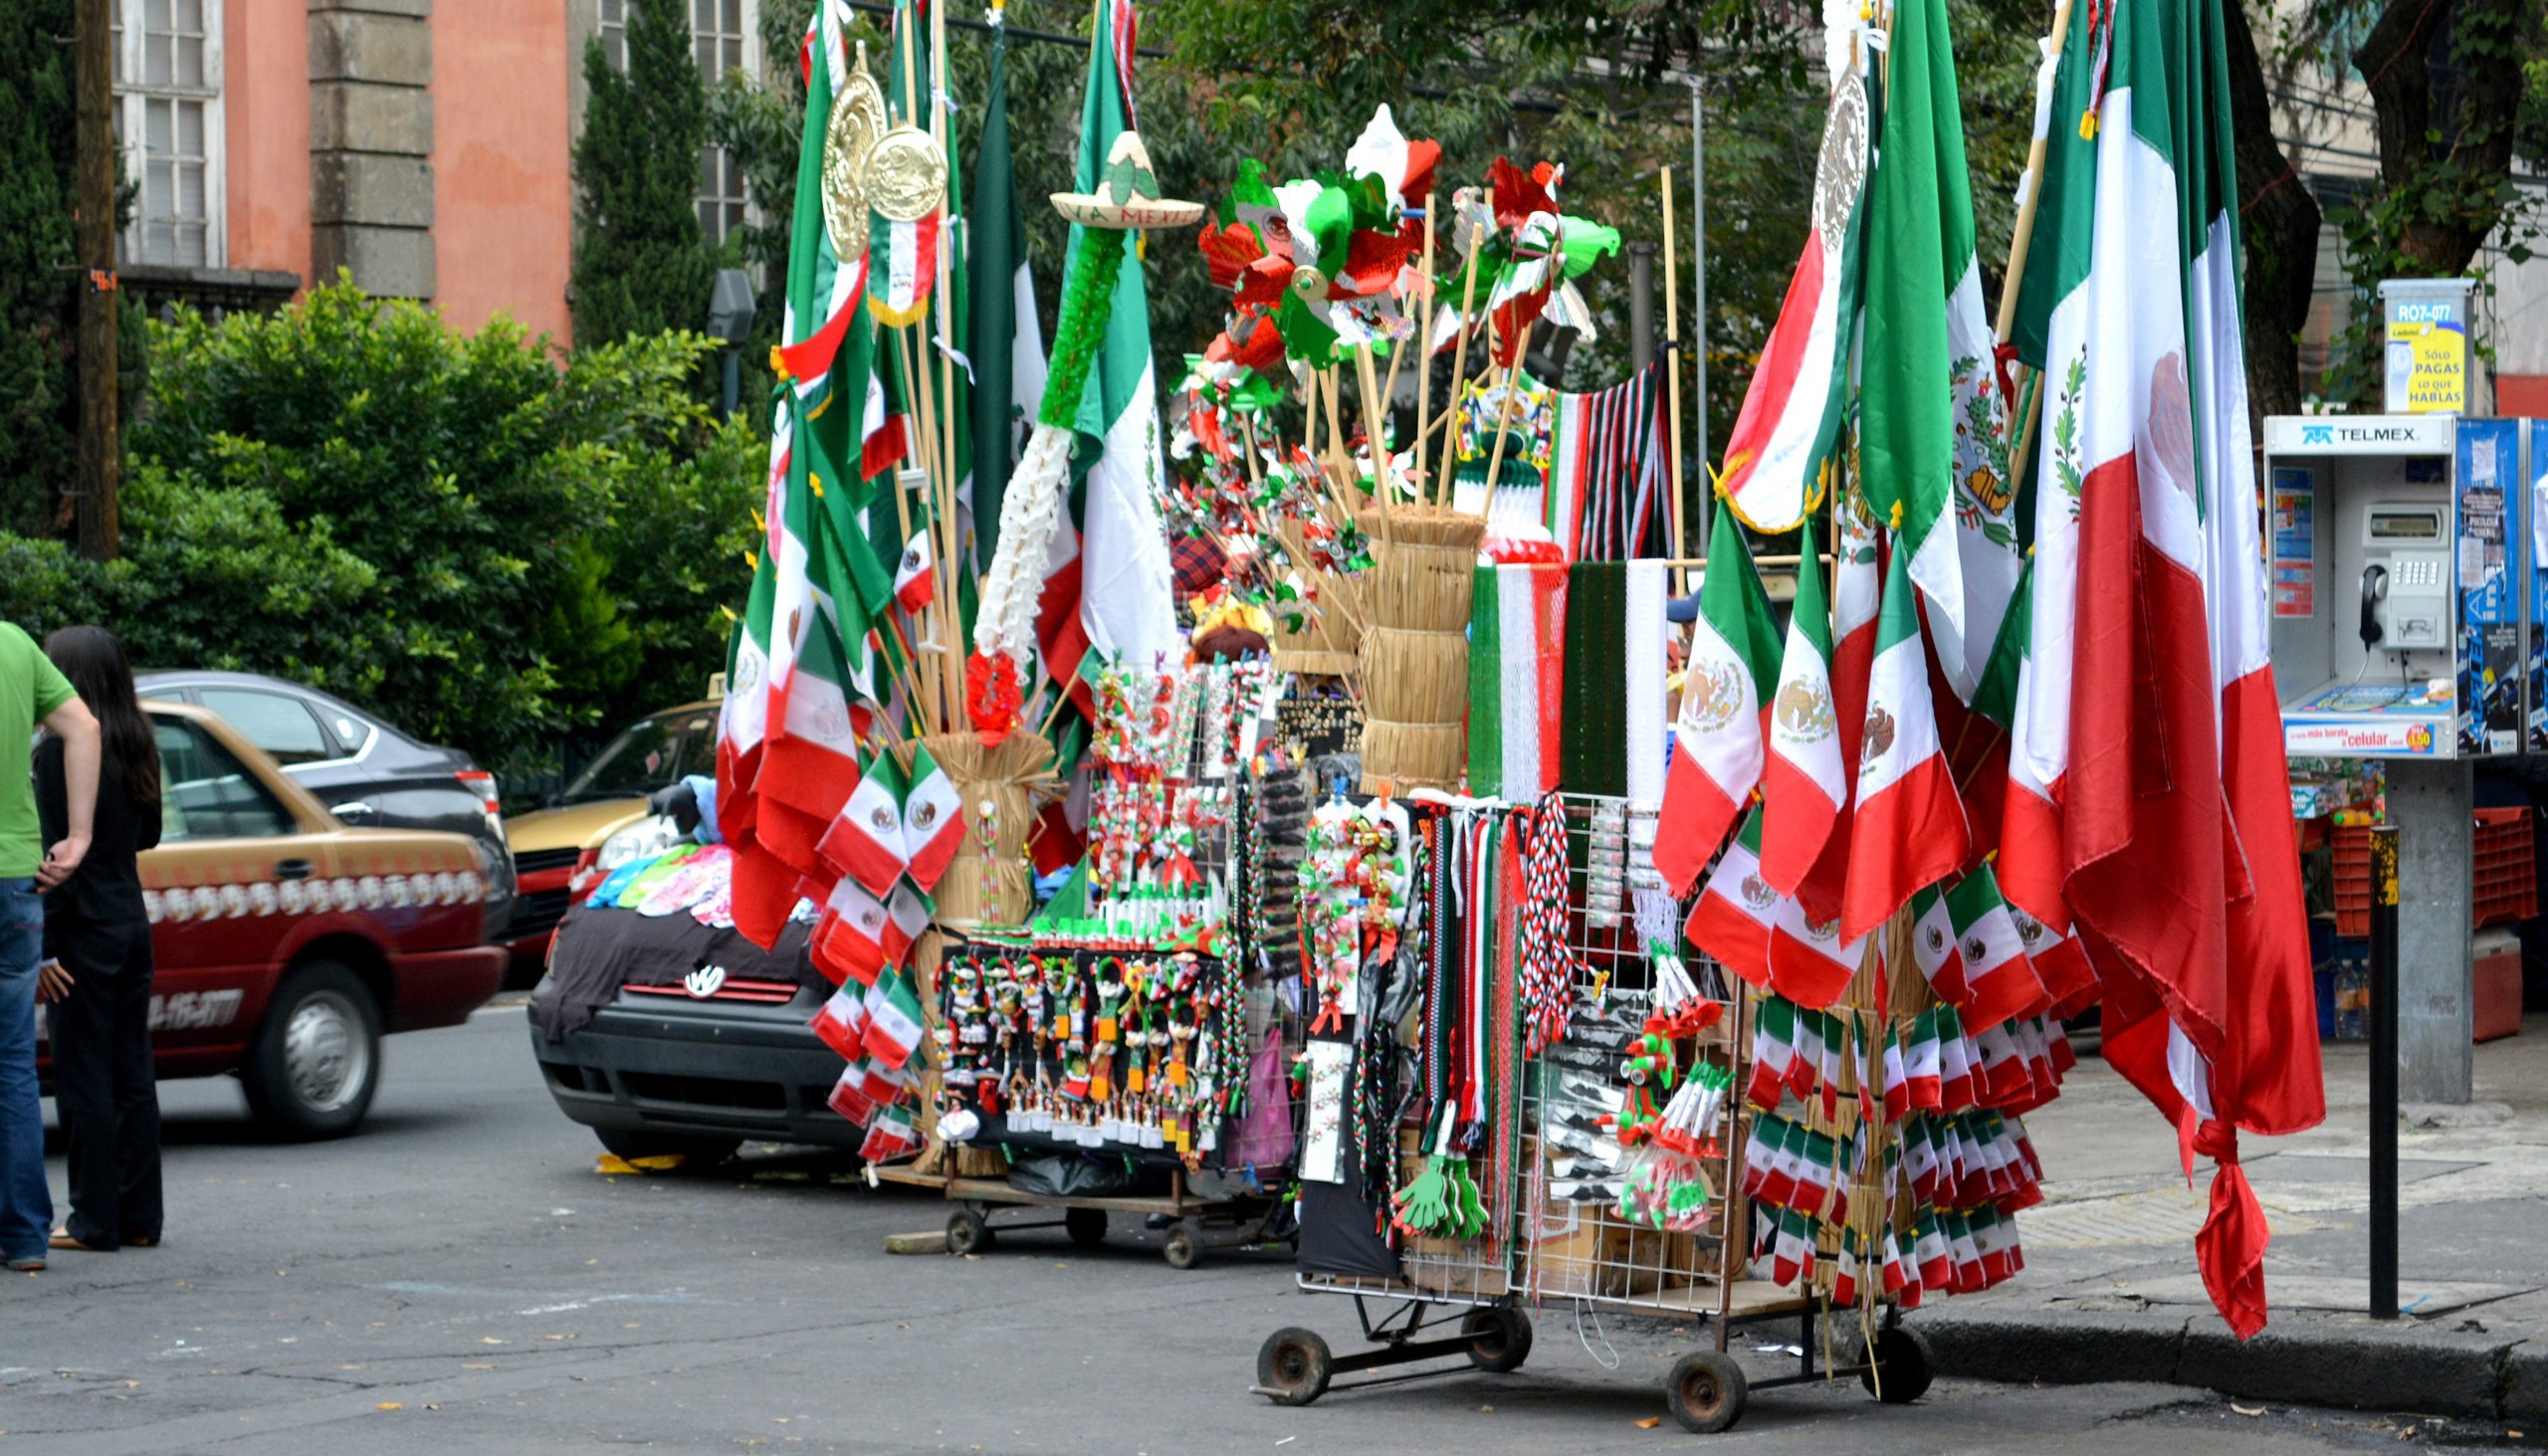 11a stand of Mexican flags